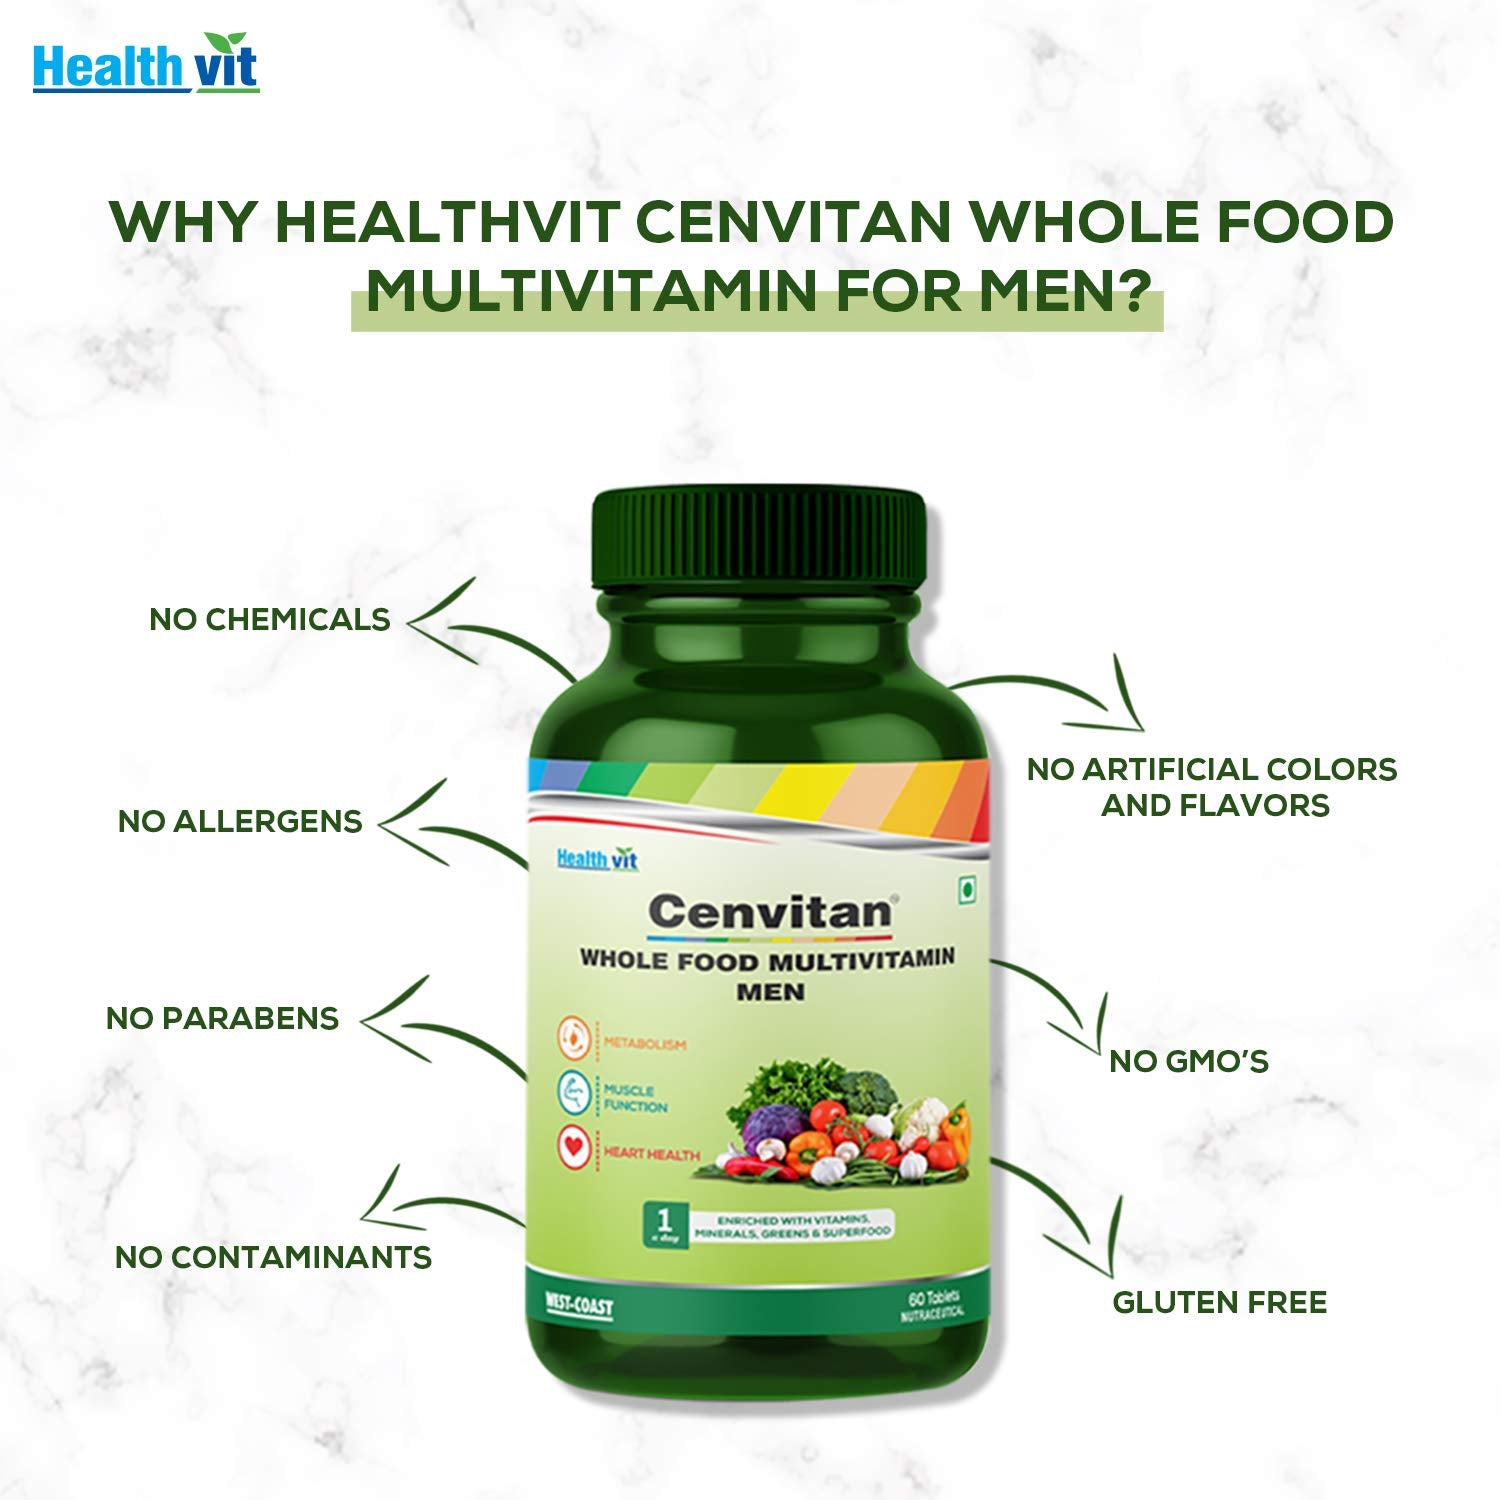 Healthvit Cenvitan Plant Based Whole Food Multivitamin for Men | Enriched with Vitamins Minerals Greens, Vegetables, Superfood, Fruits & Herbs Supplement For Immunity, Heart & Eye Health – 60 Tablets